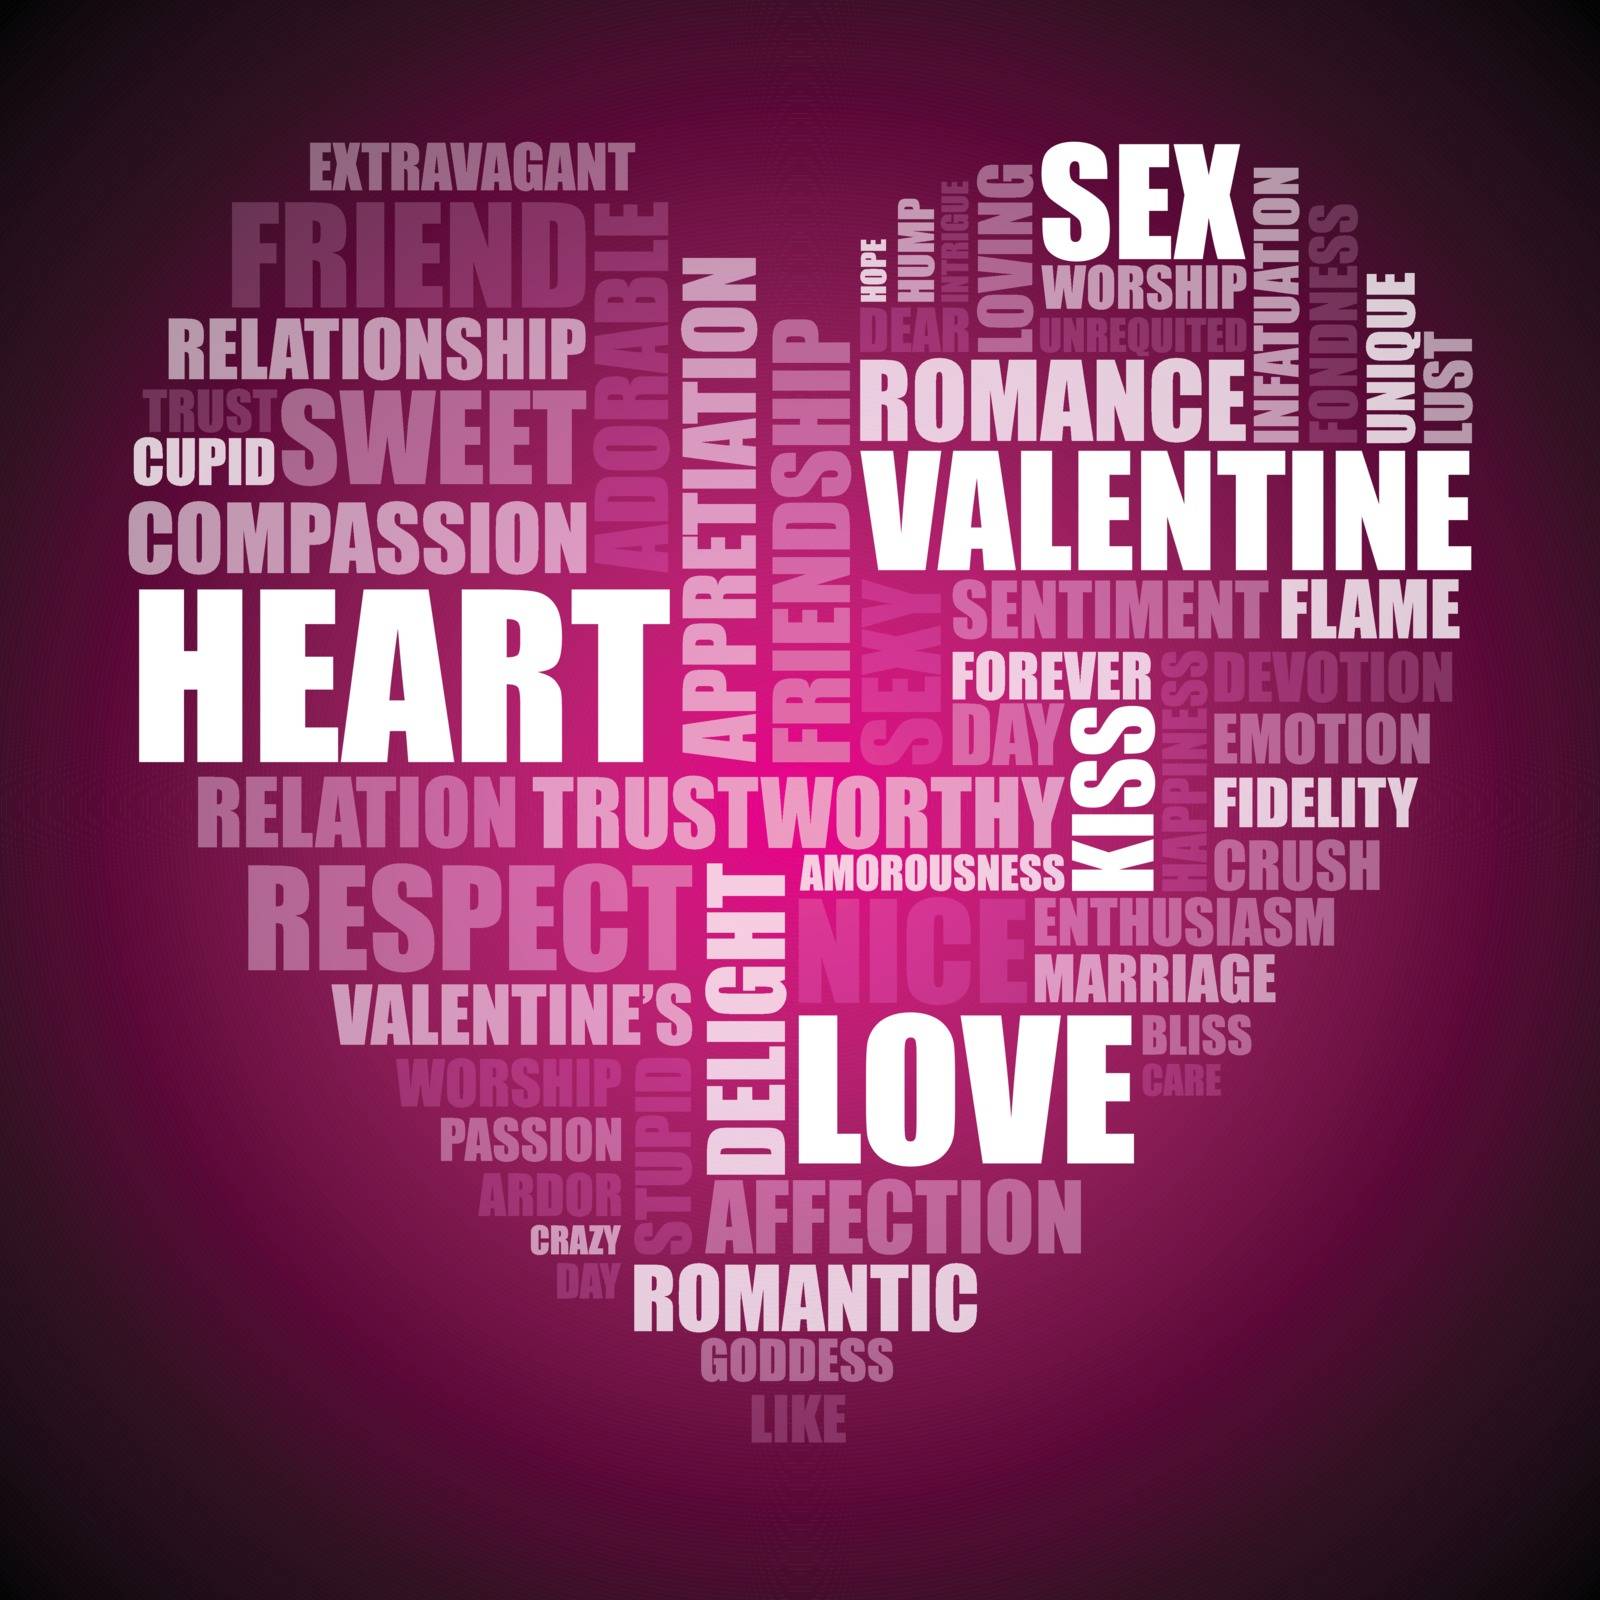 Love related words in a cloud of words on pink background